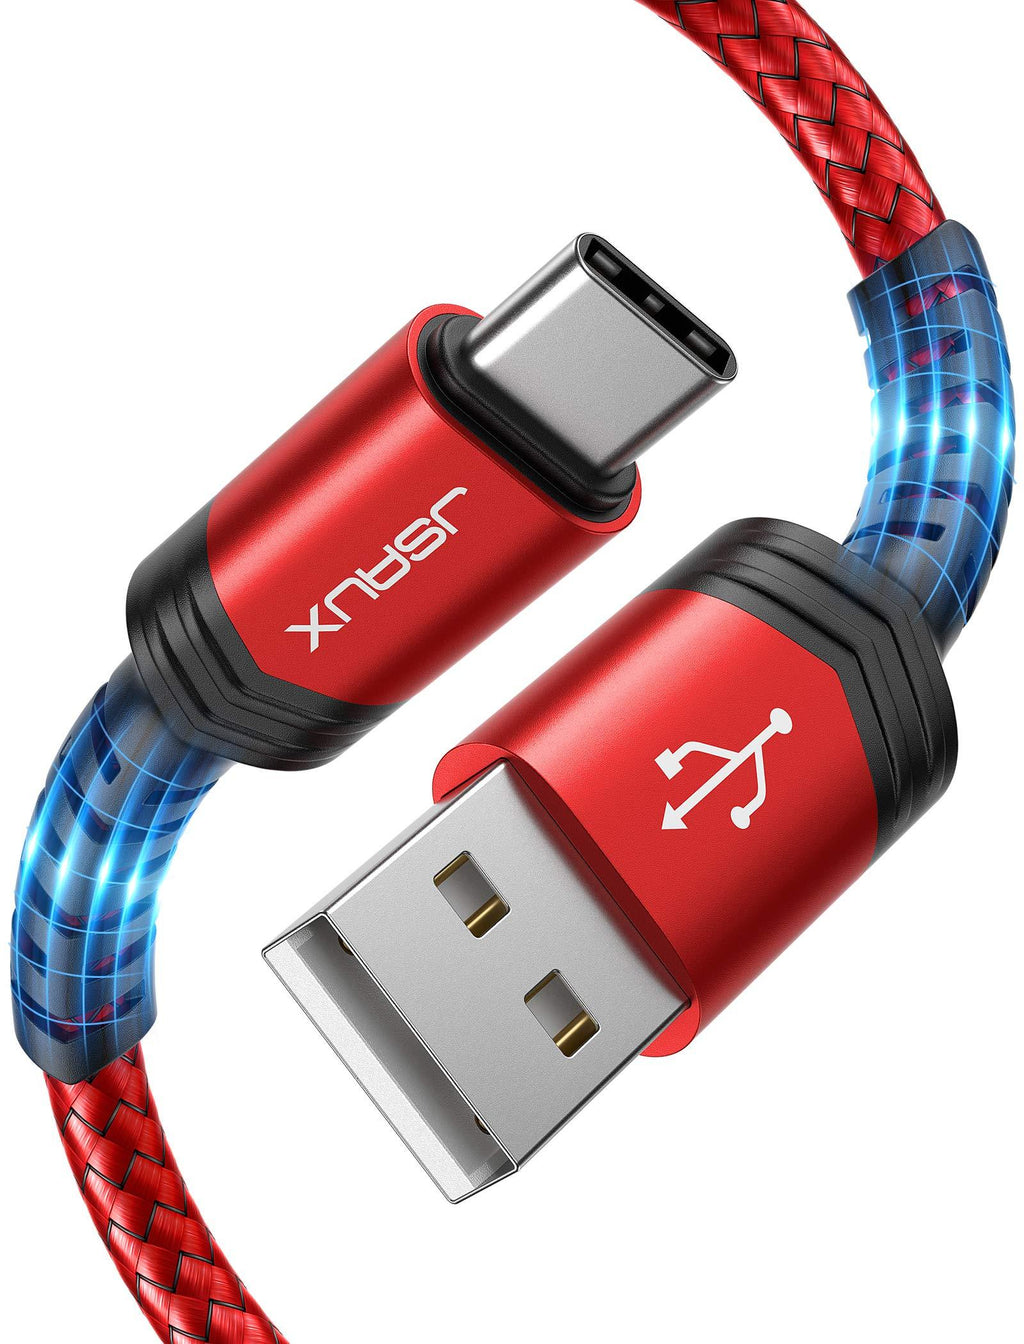 USB Type C Cable 3A Fast Charging [2-Pack 6.6ft], JSAUX USB-A to USB-C Charge Braided Cord Compatible with Samsung Galaxy S10 S9 S8 S20 Plus A51 A11,Note 10 9 8, PS5 Controller, USB C Charger-Red Red